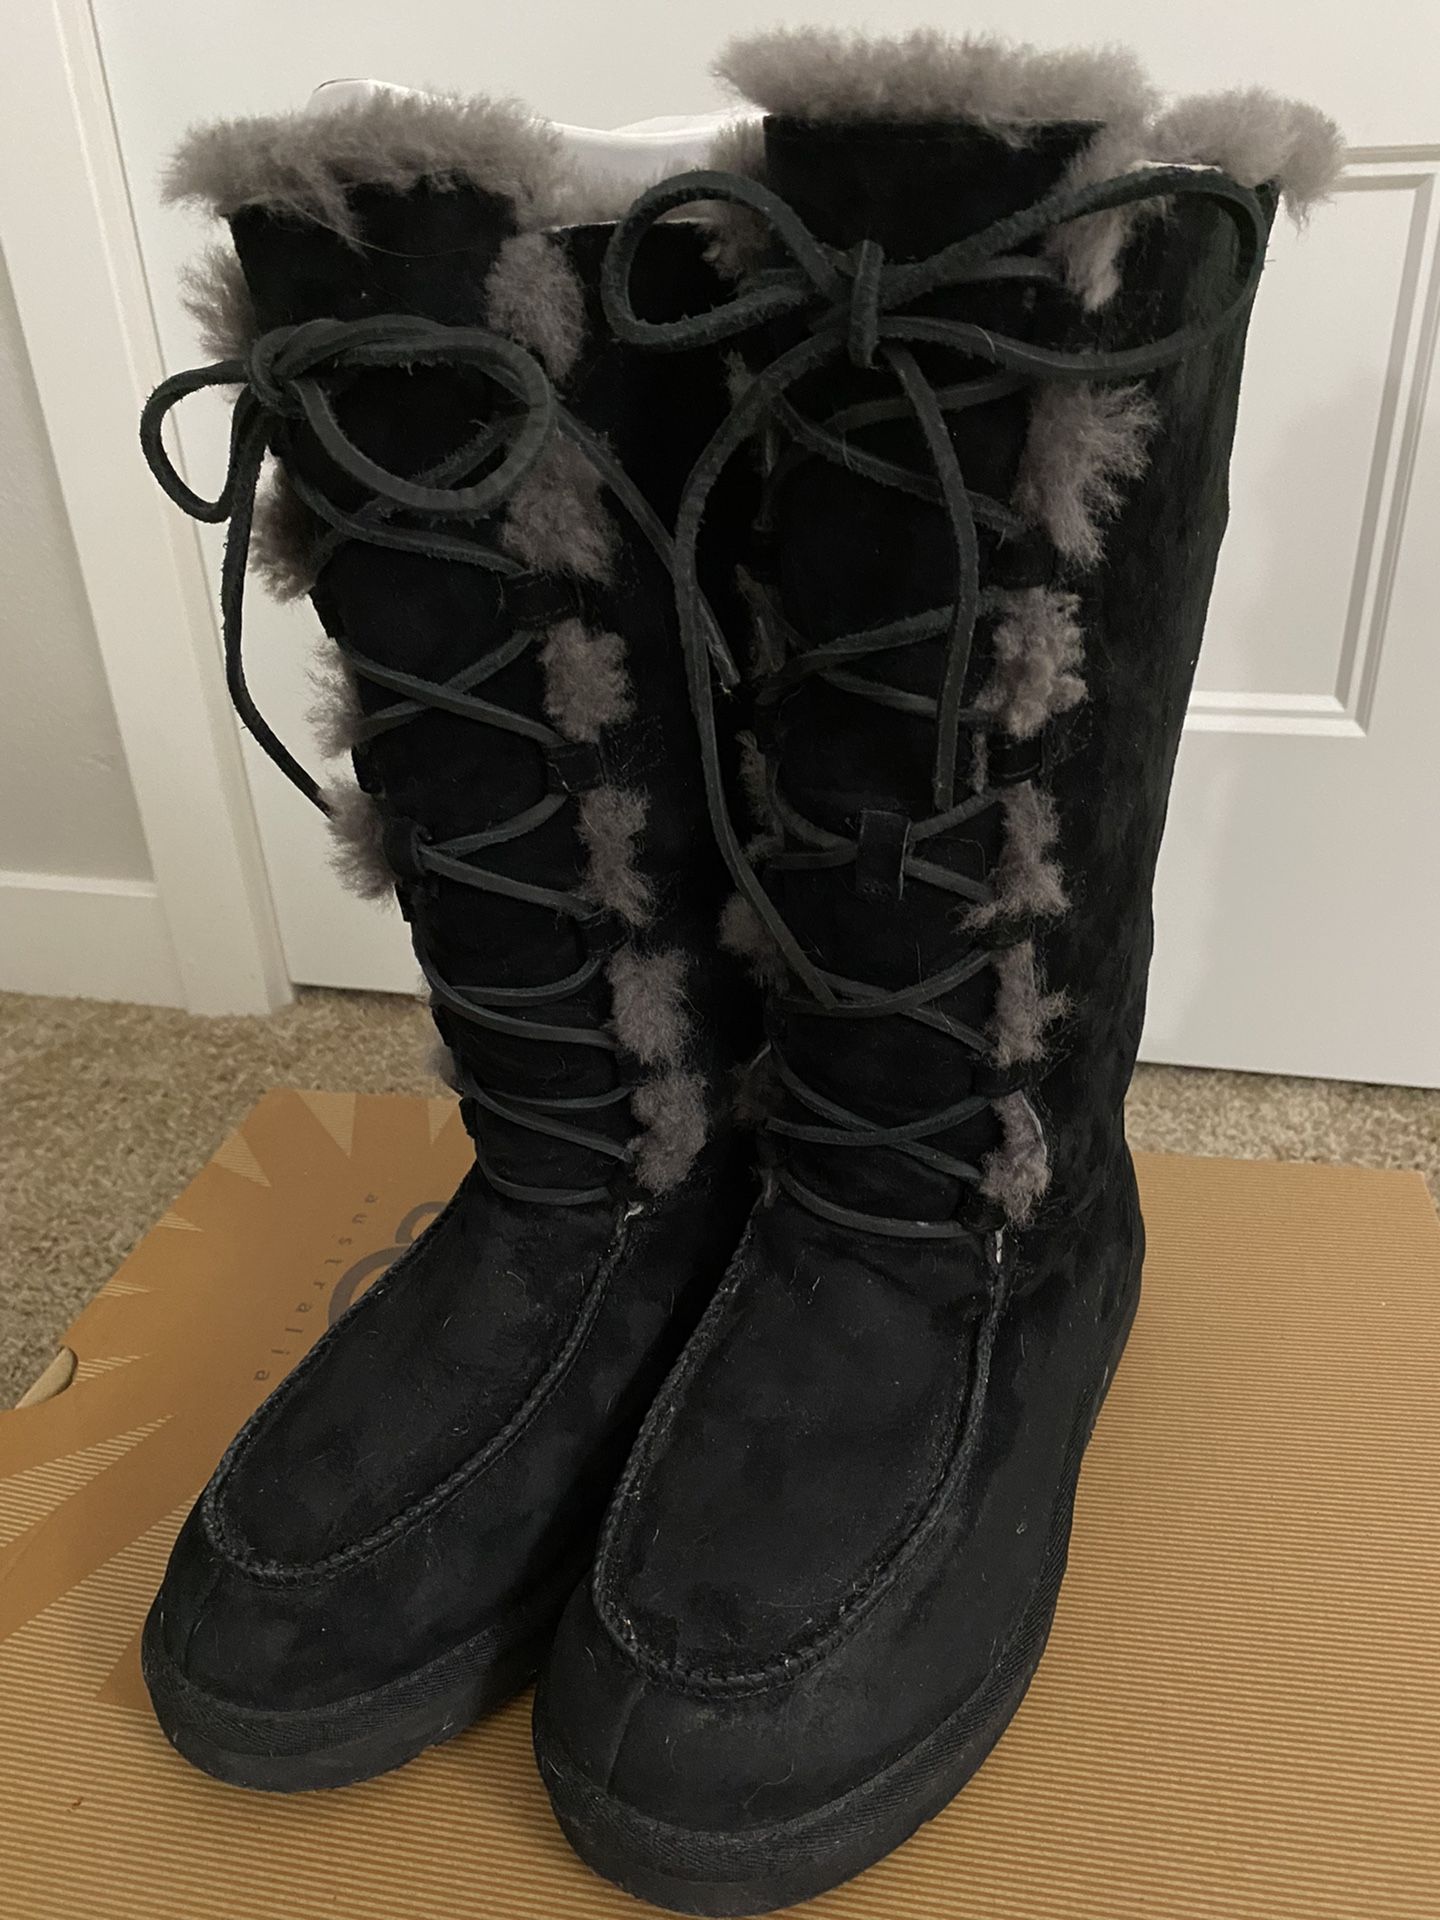 UGG Uptown II Black Suede Fur-Lined Boots Size 9 (worn 2-3 times)